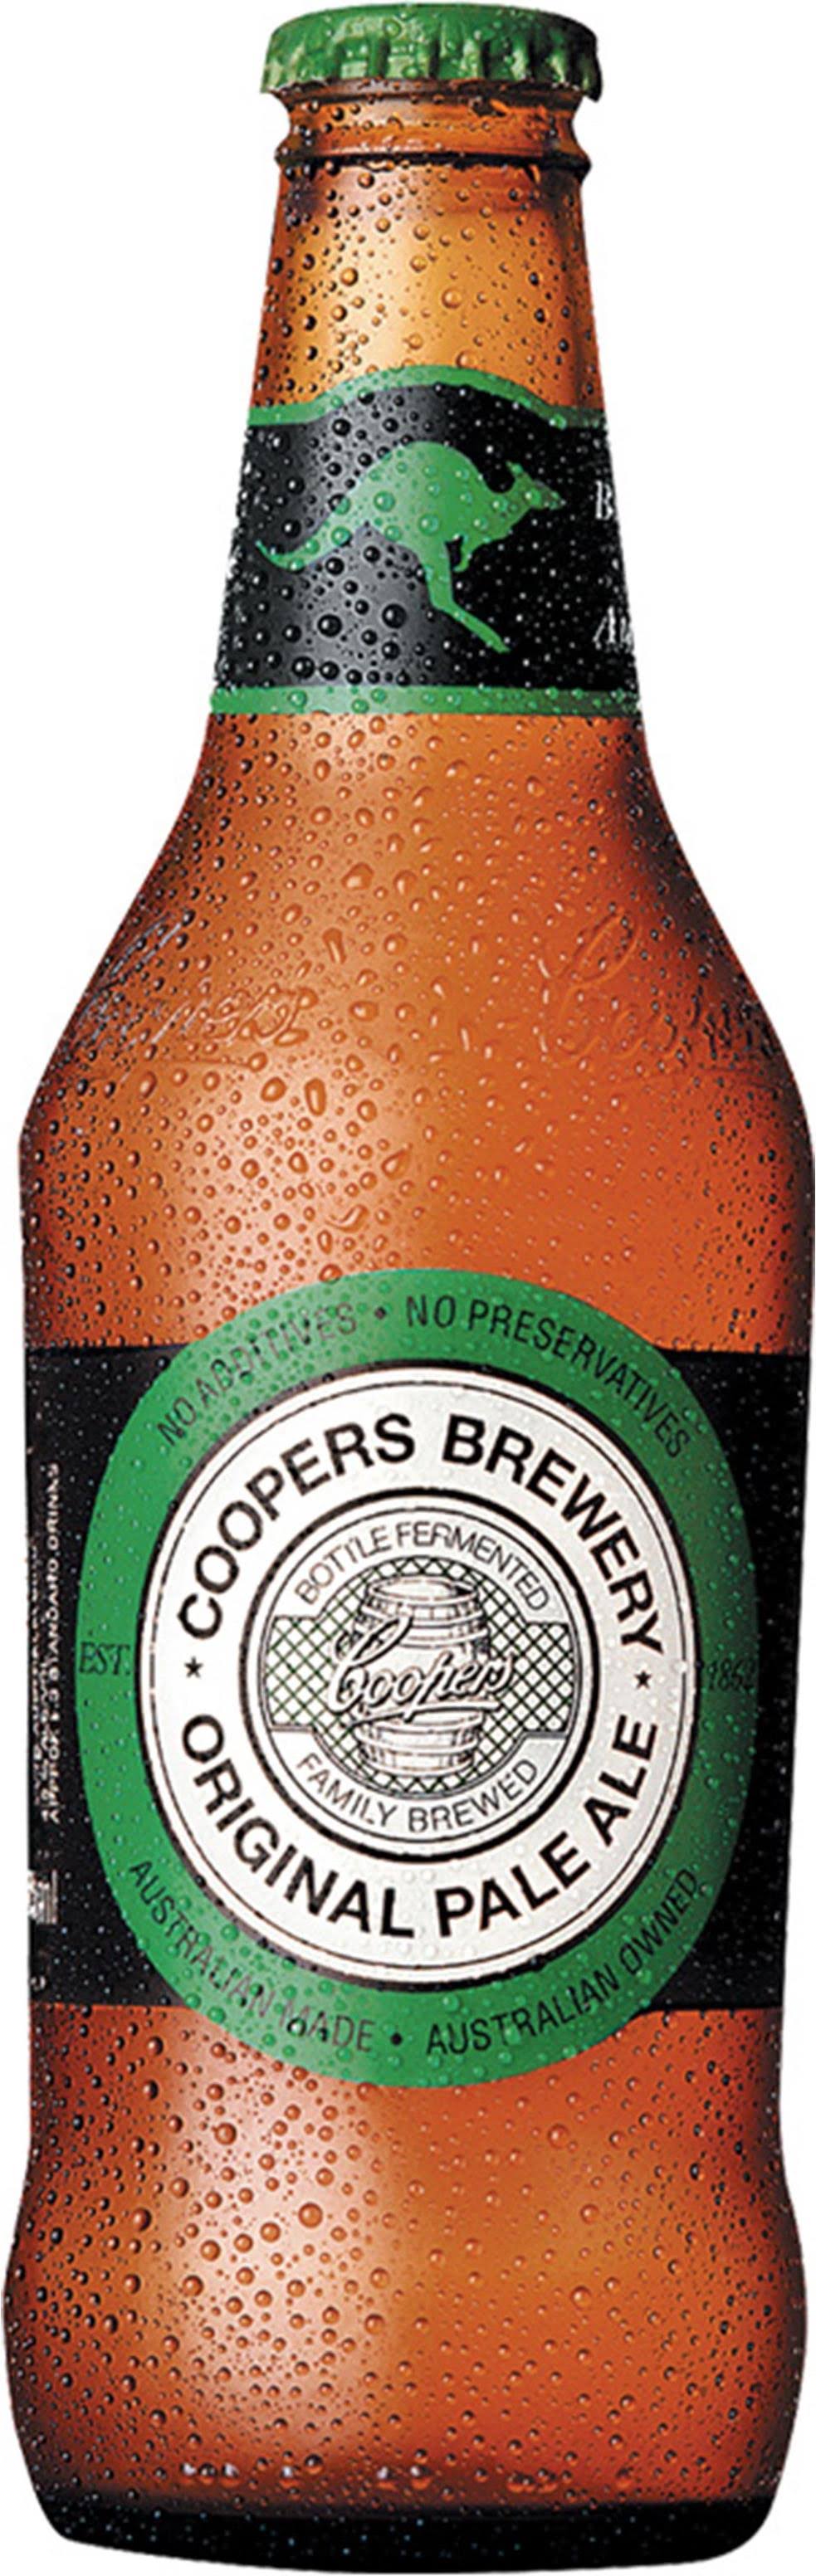 Coopers Brewery Original Ale - Pale, 375ml